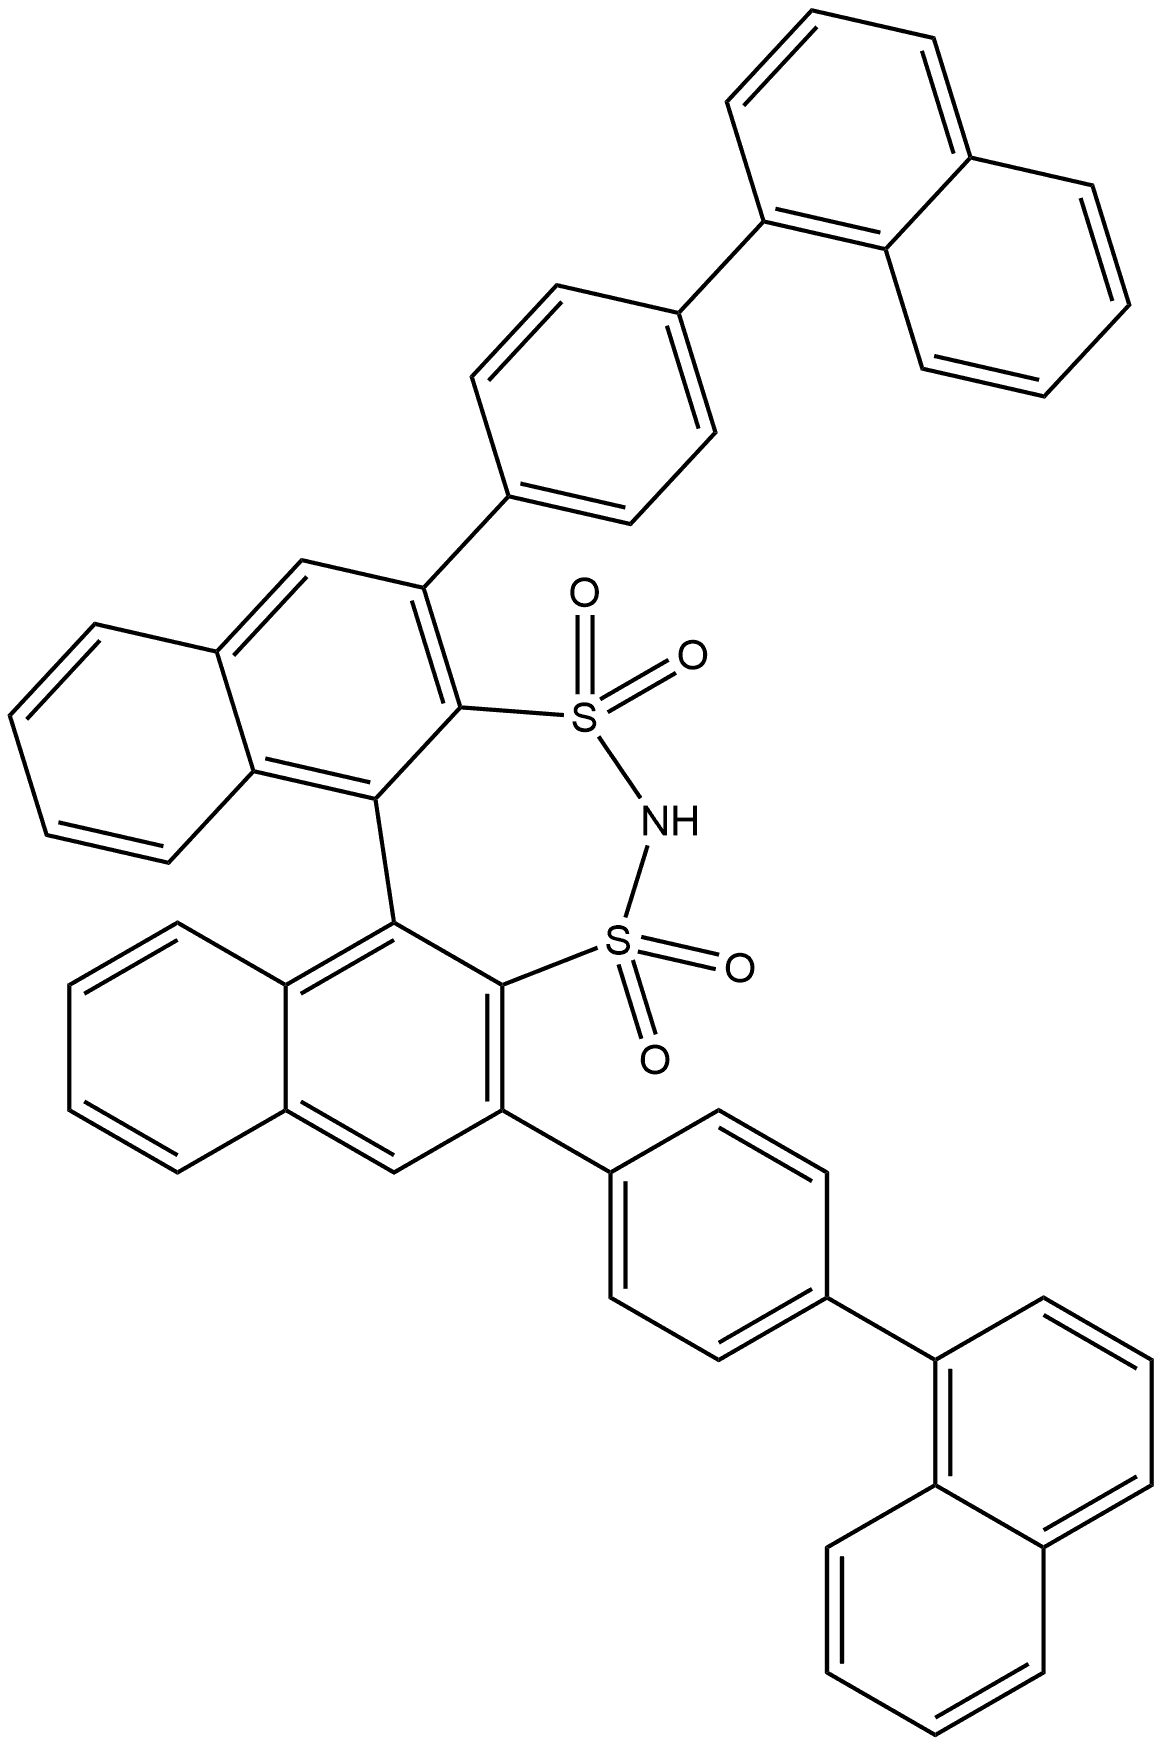 Dinaphtho[2,1-d:1',2'-f][1,3,2]dithiazepine, 2,6-bis[4-(1-naphthalenyl)phenyl]-, 3,3,5,5-tetraoxide, (11bR)-,1245748-63-3,结构式